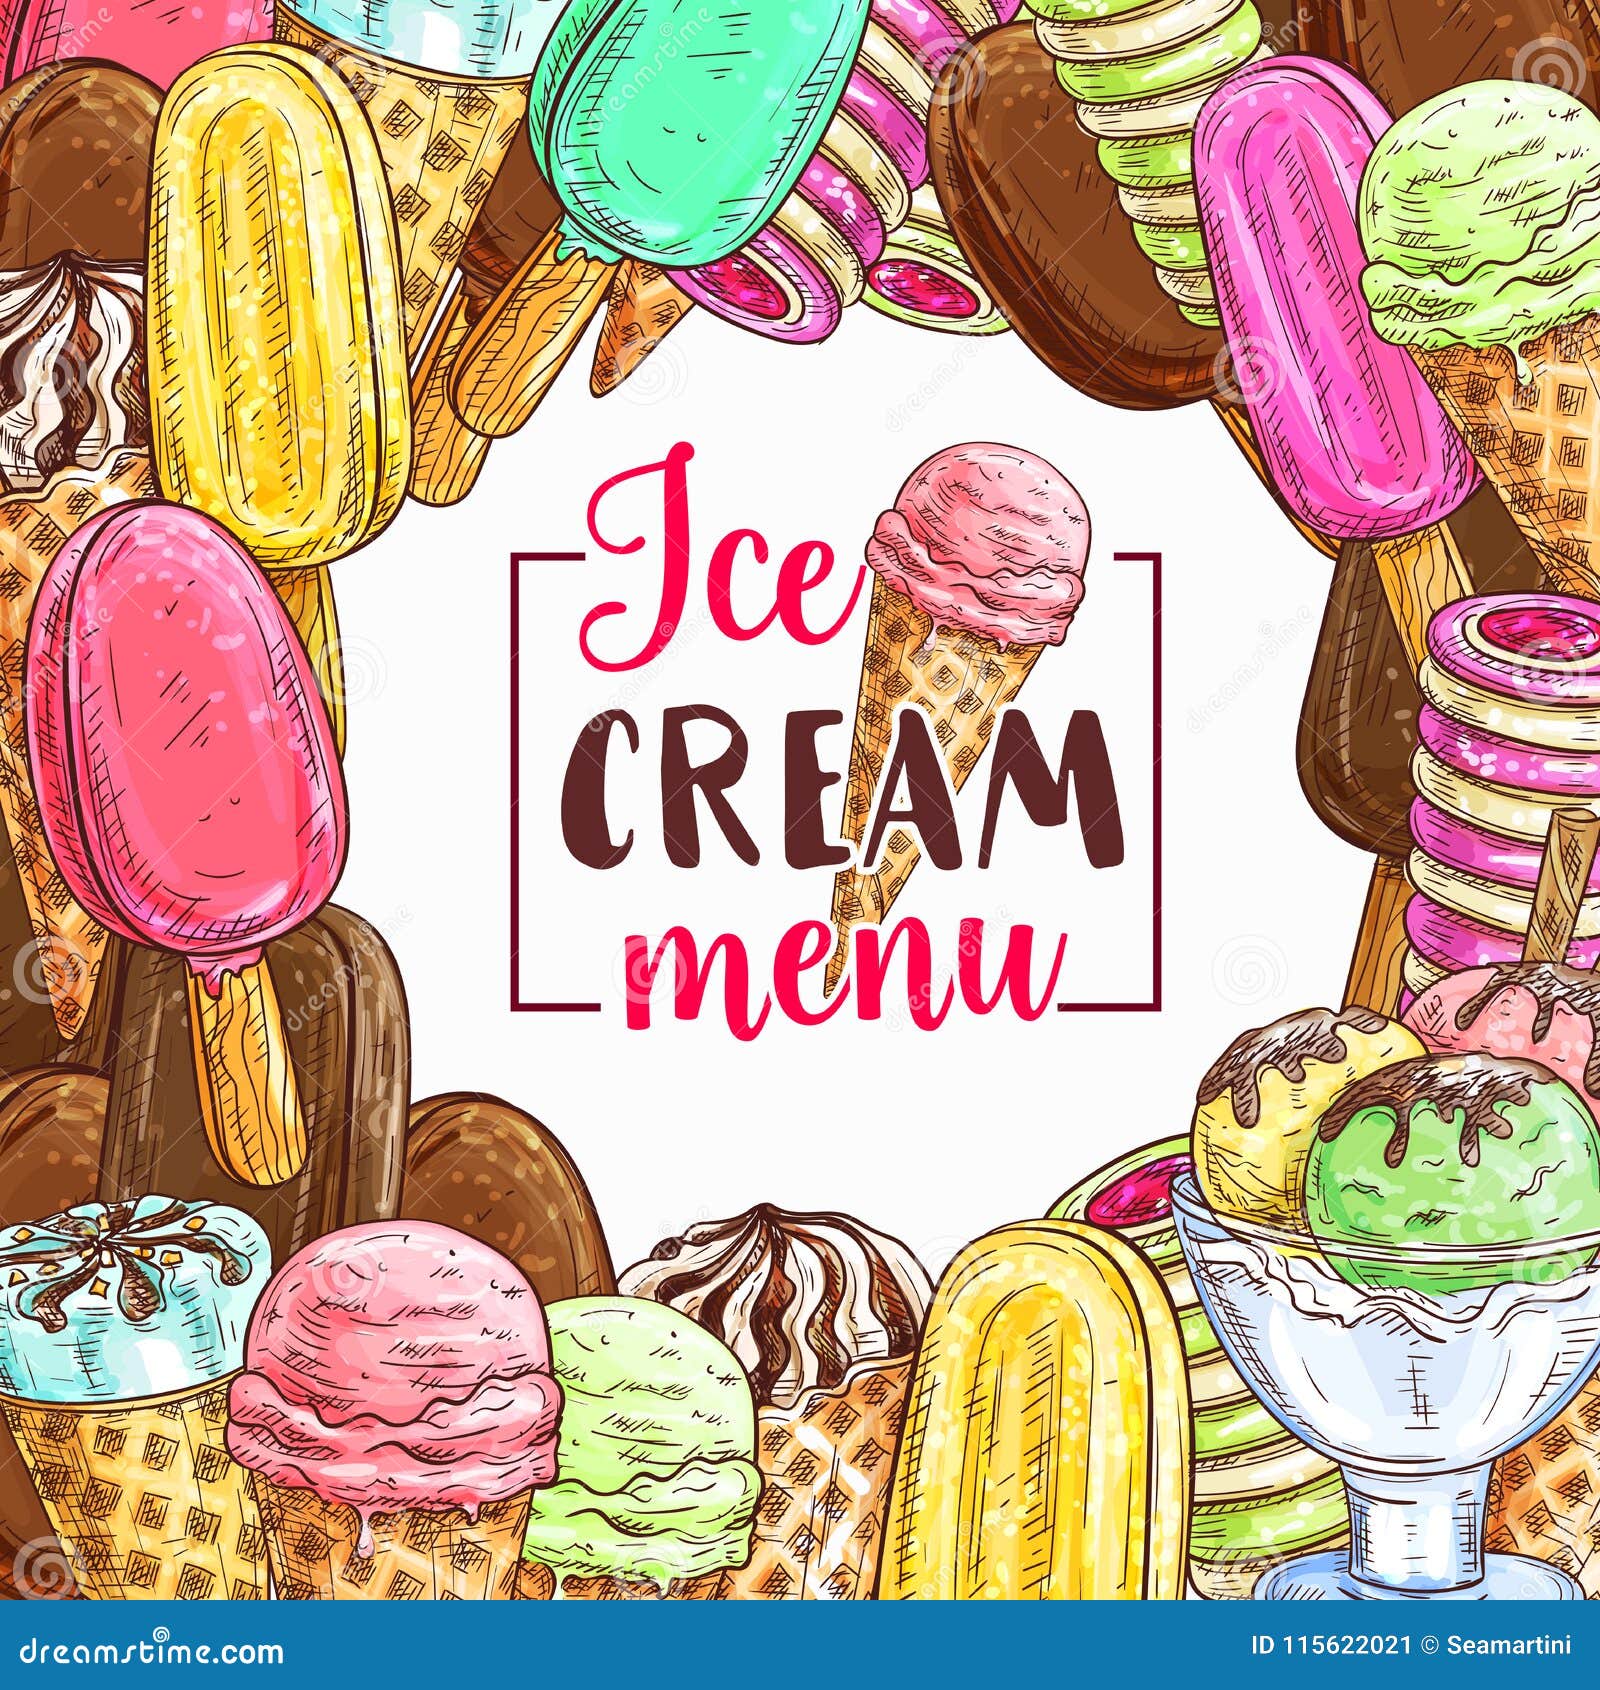 Ice cream parlor cold dessert business for summer Vector Image